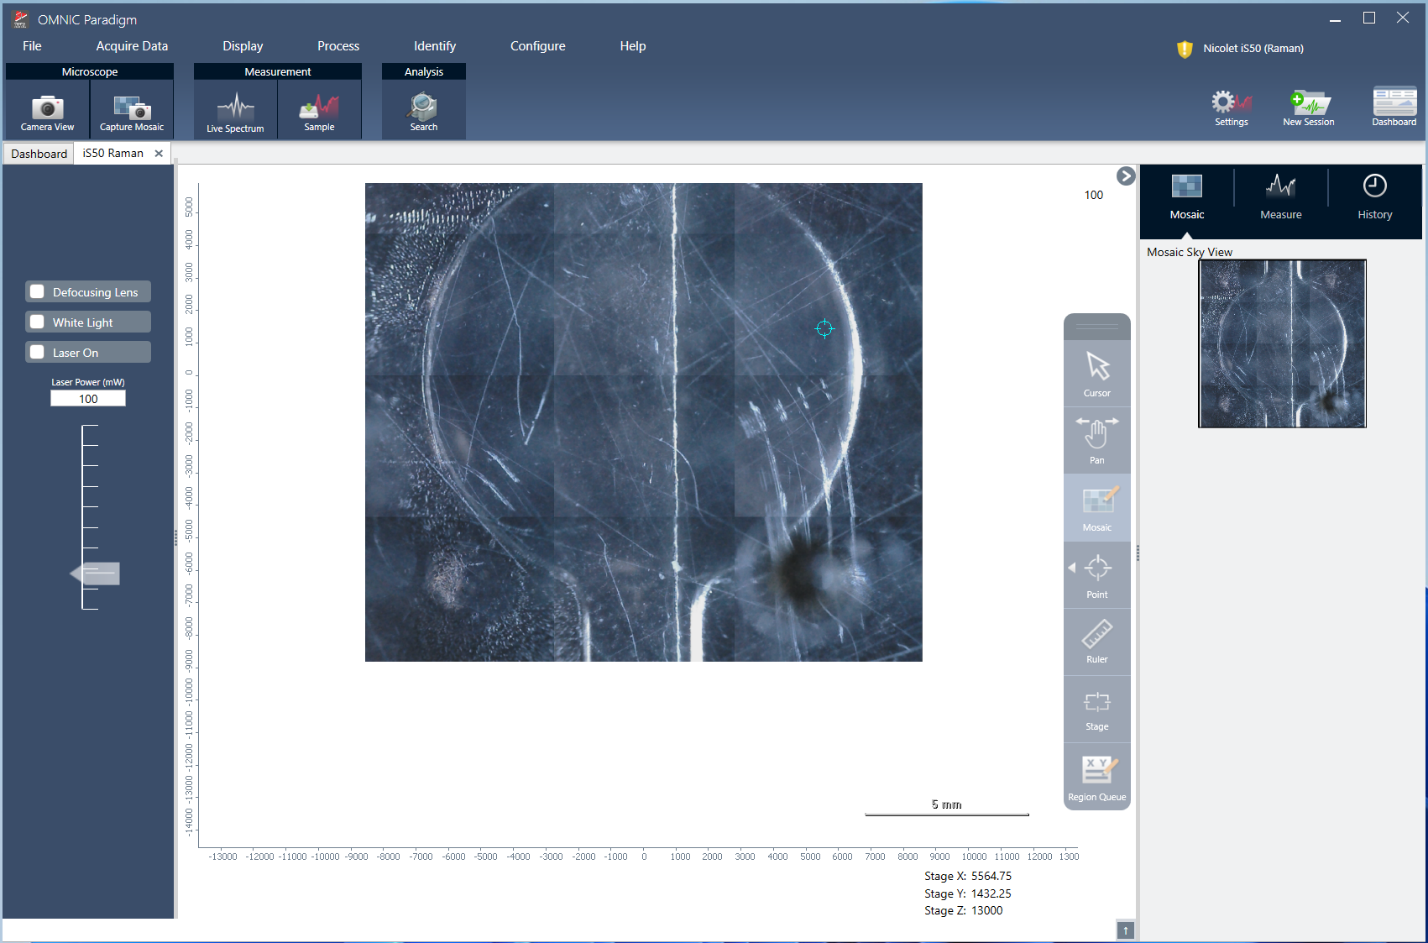 Mosaic view when using the Raman module with OMNIC Paradigm software